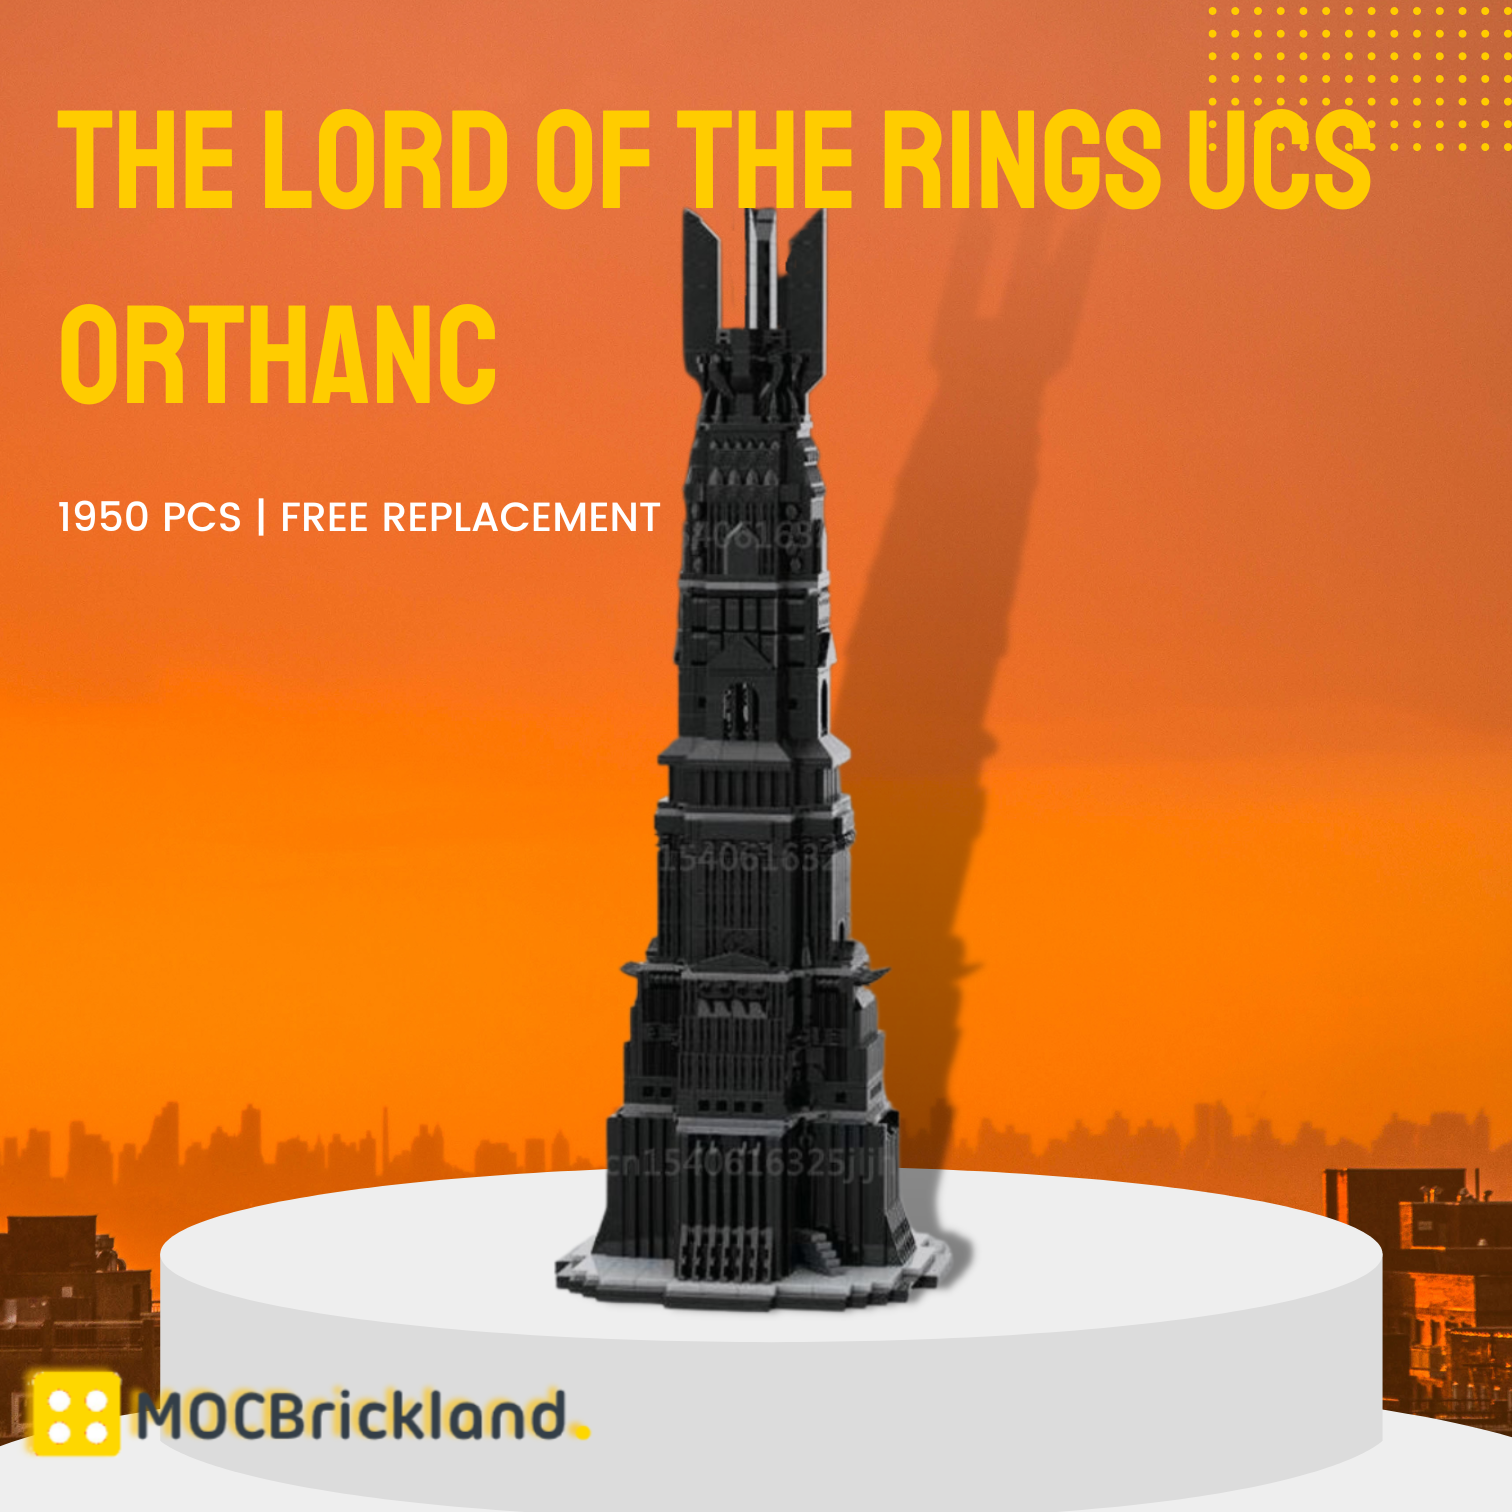 Orthanc-Lord of the Rings, 2